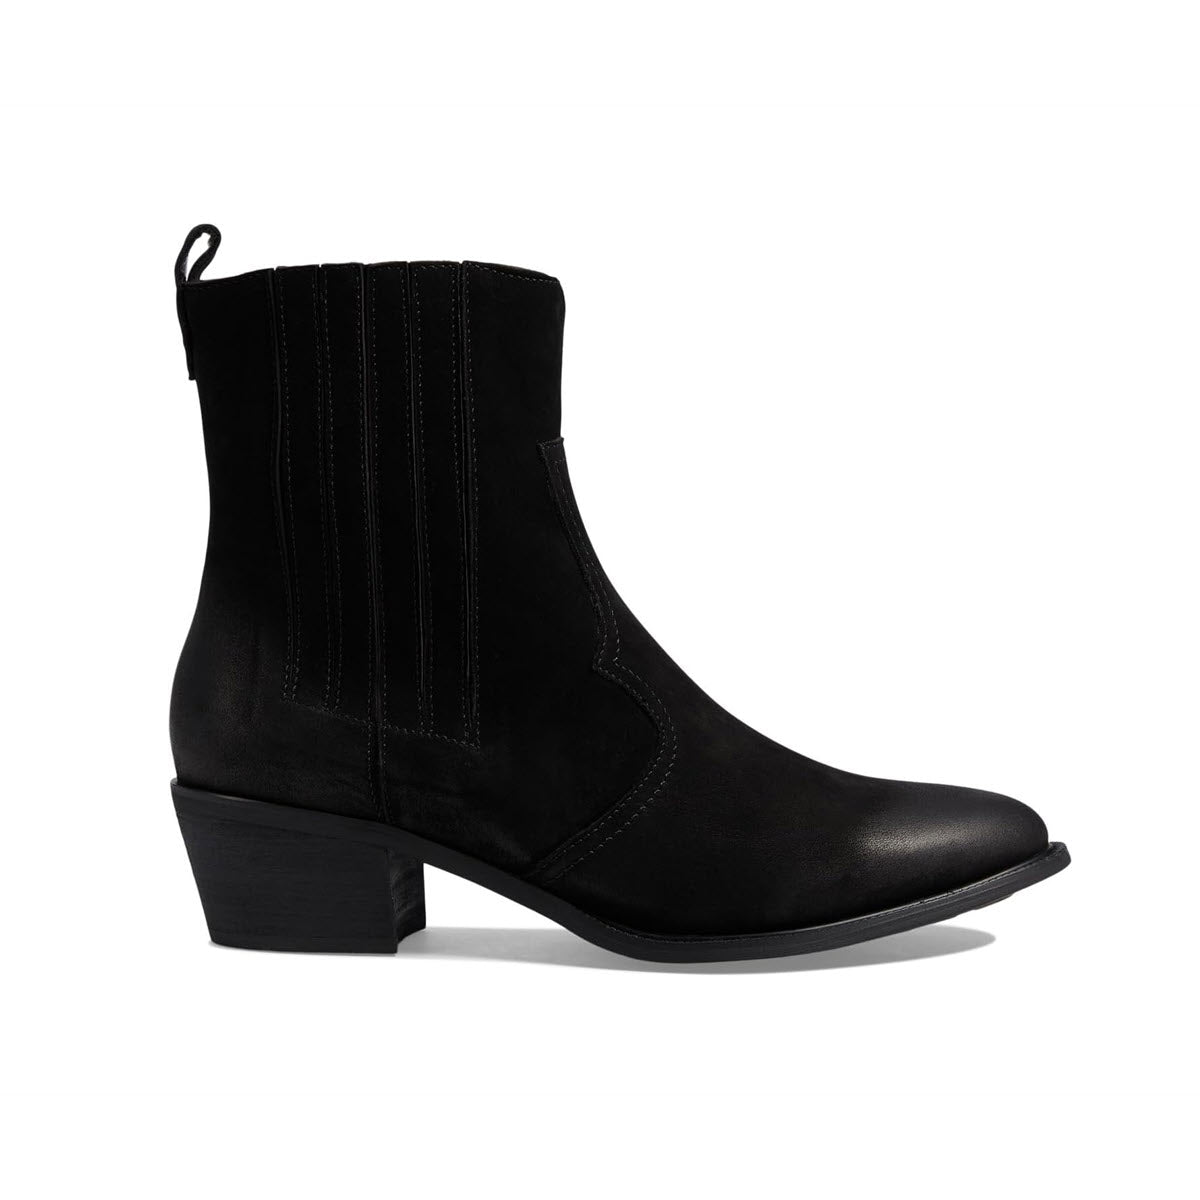 Black DAVID TATE BASIL ankle boot with a burnished leather upper and block heel against a white background.